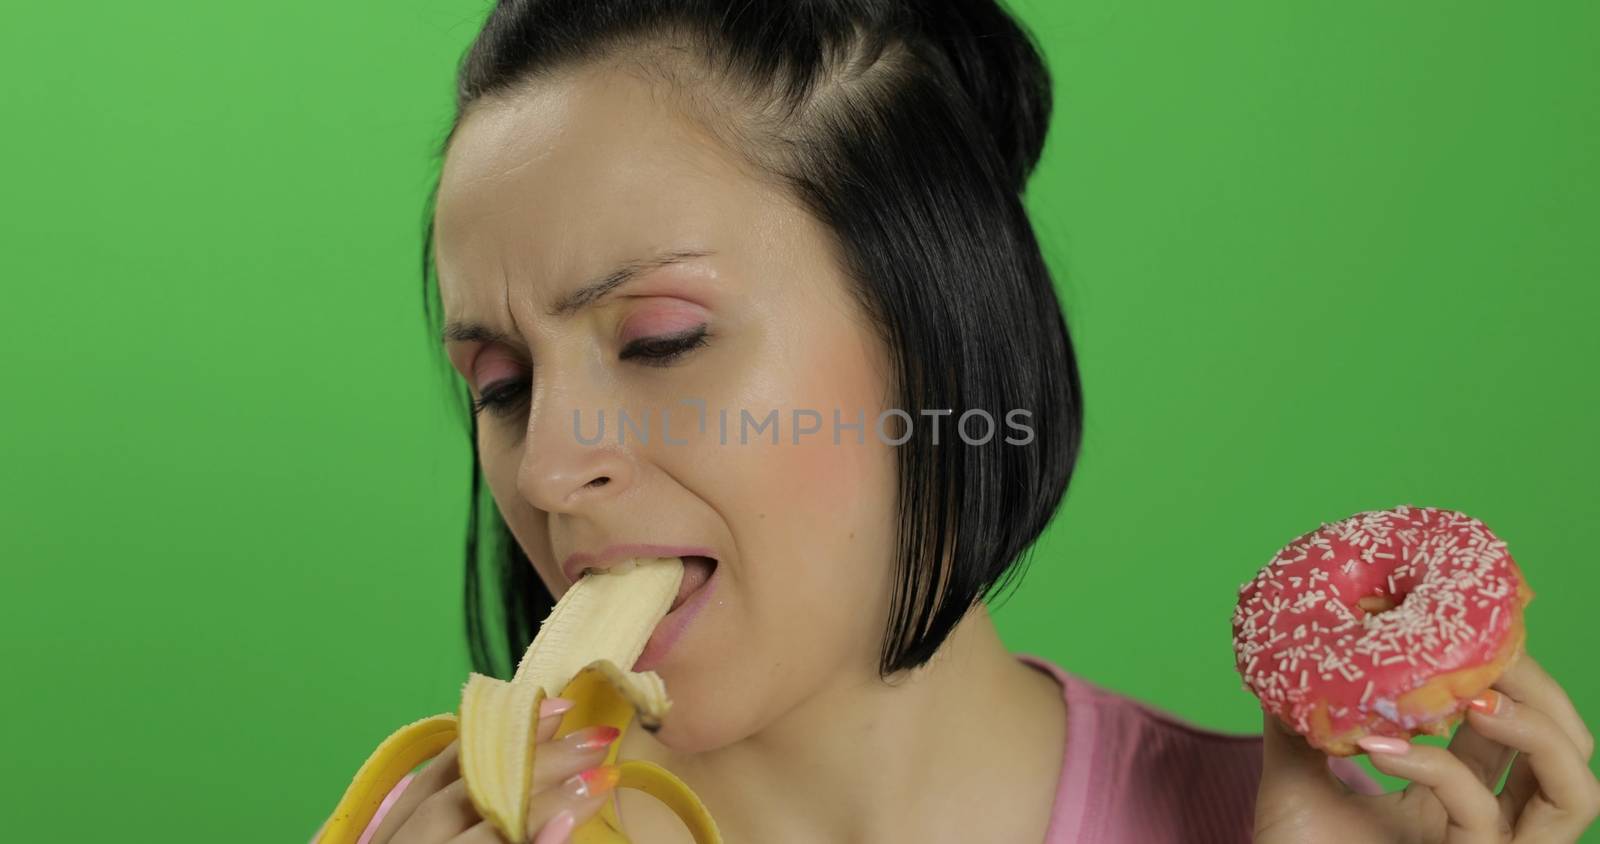 Starting healthy eating. Say no to junk food. Beautiful sad young girl on a chroma key background holds donut in one hand and banana on other. Cute woman choice donut or banana to eat